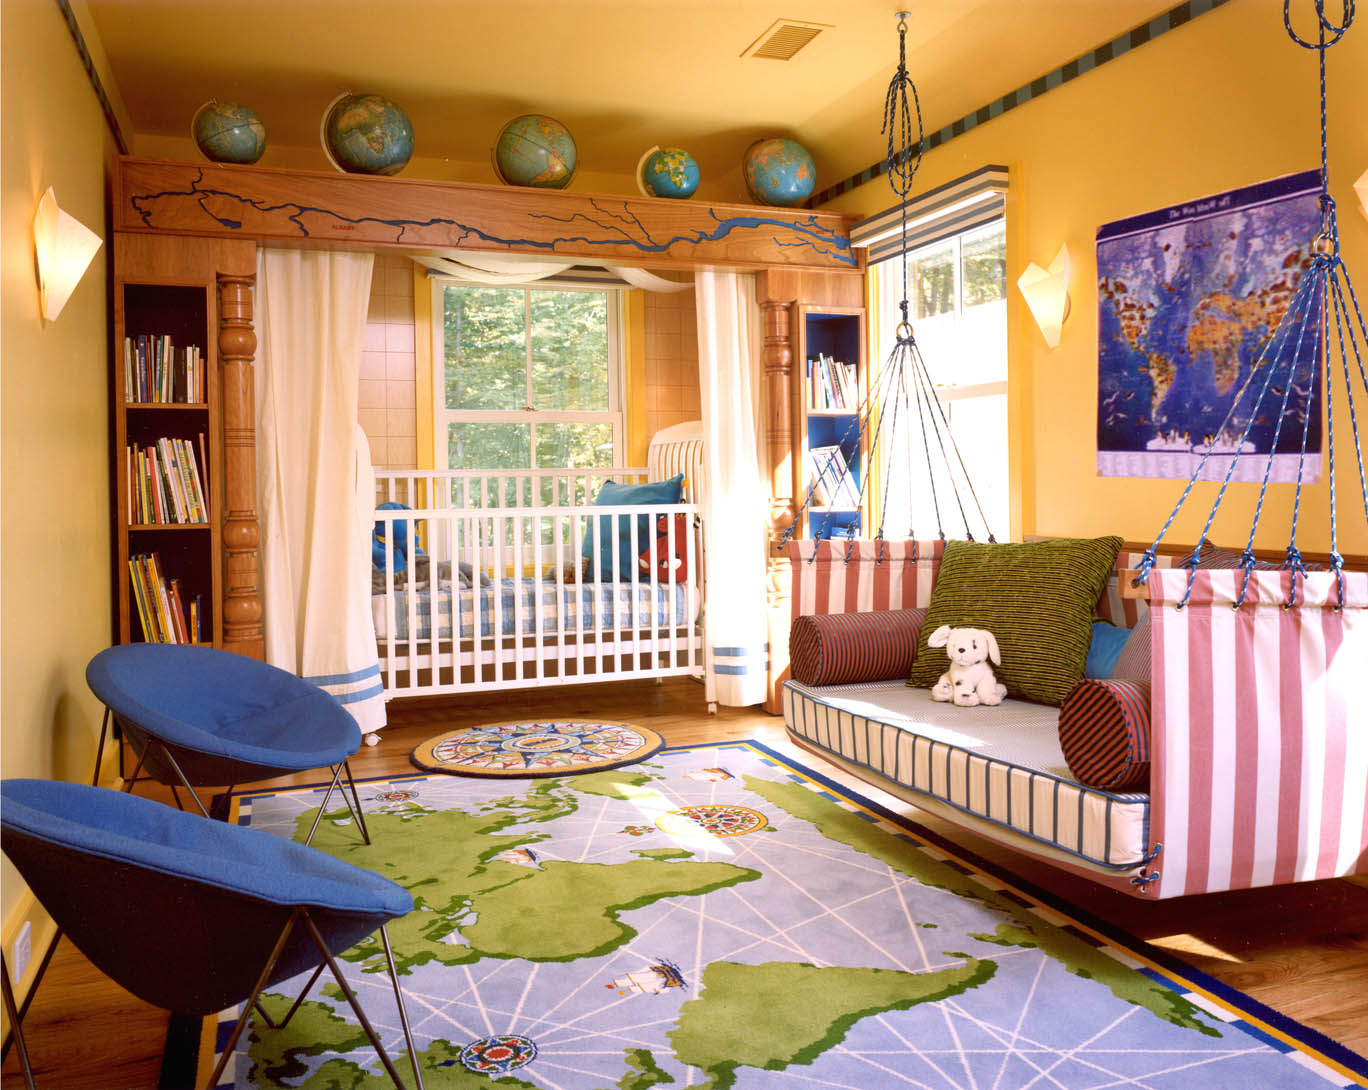 Kid Room Hanging Astonishing Kid Room Ideas With Hanging Single Bed And Blue Chairs Furnished With Rug In Map Design Also Completed With White Cribs Combined With Cupboards Kids Room 15 Trendy Kids Room Ideas For The Bold Modern Home